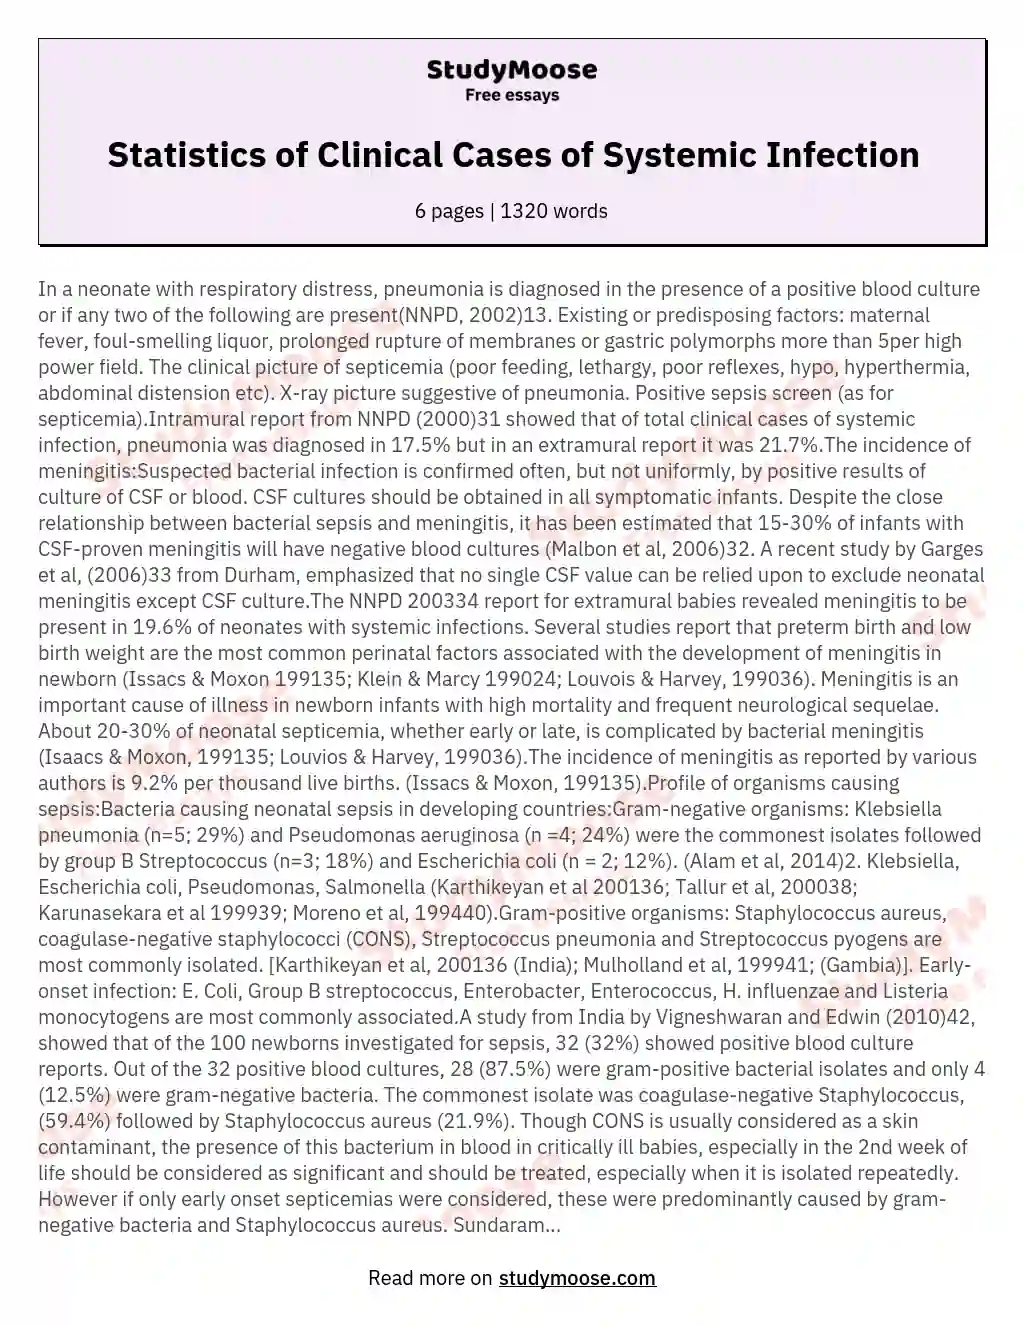 Statistics of Clinical Cases of Systemic Infection essay